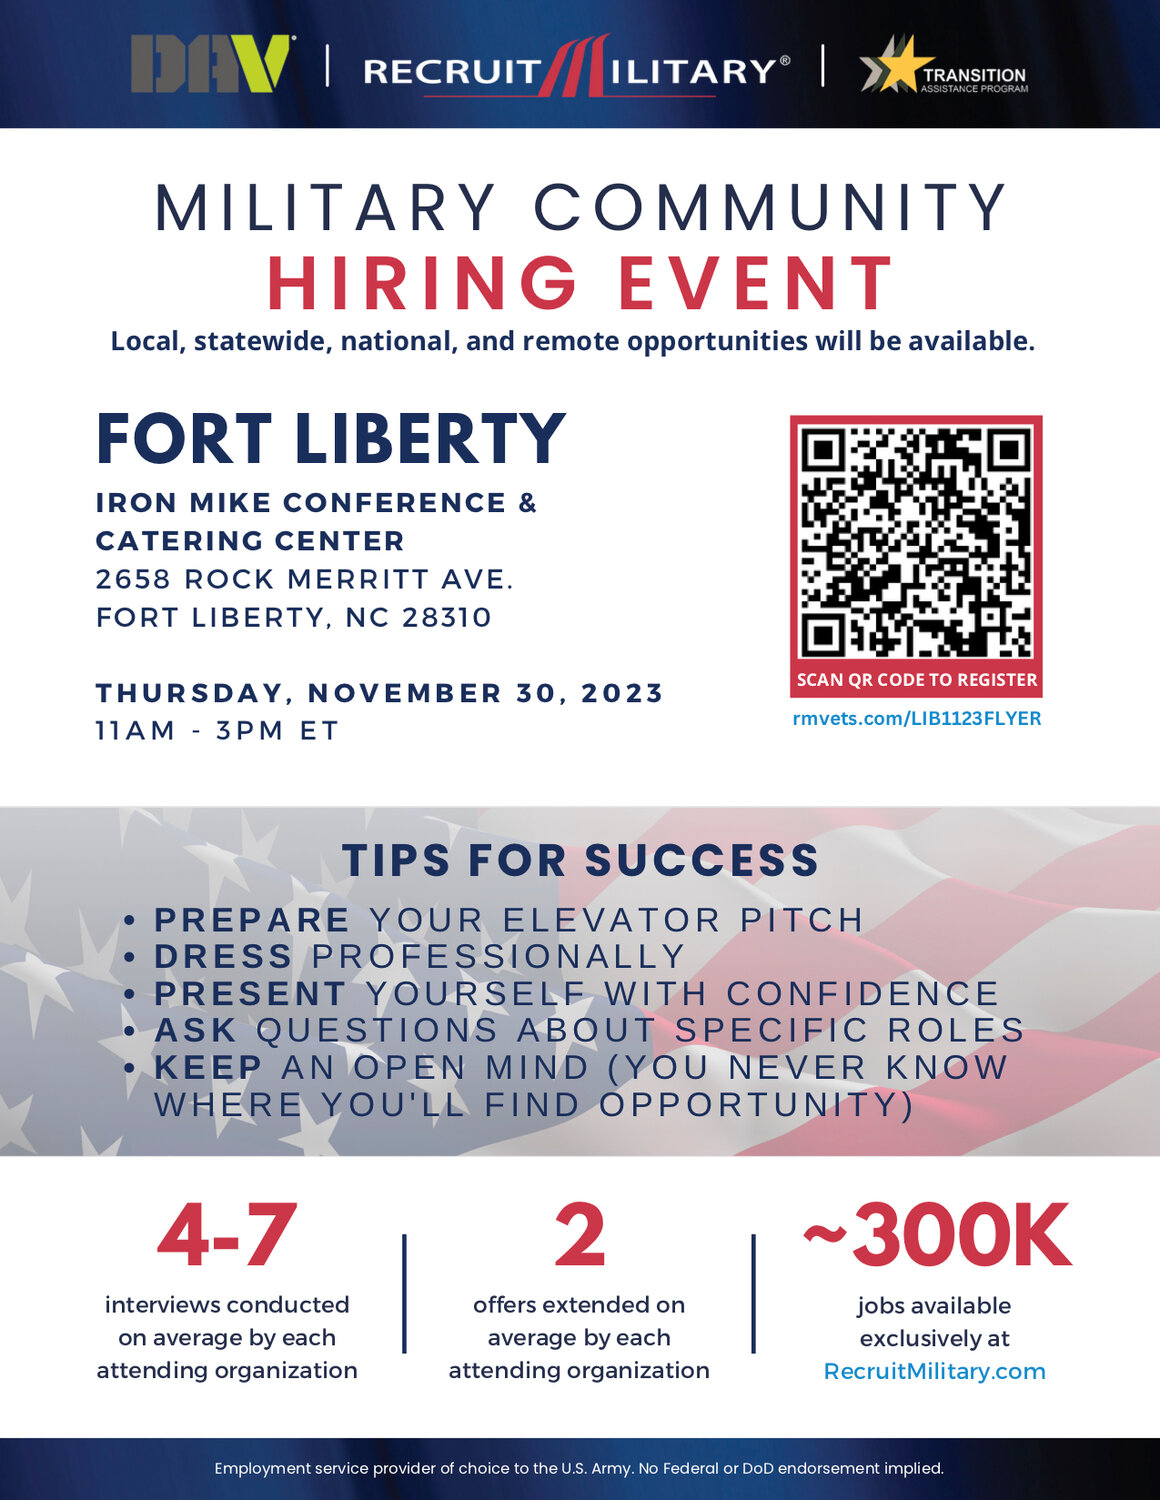 Recruit Military will host a Fort Liberty Military Community Hiring Event from 11 a.m. to 3 p.m. Thursday, Nov. 30, at the Iron Mike Conference Center.